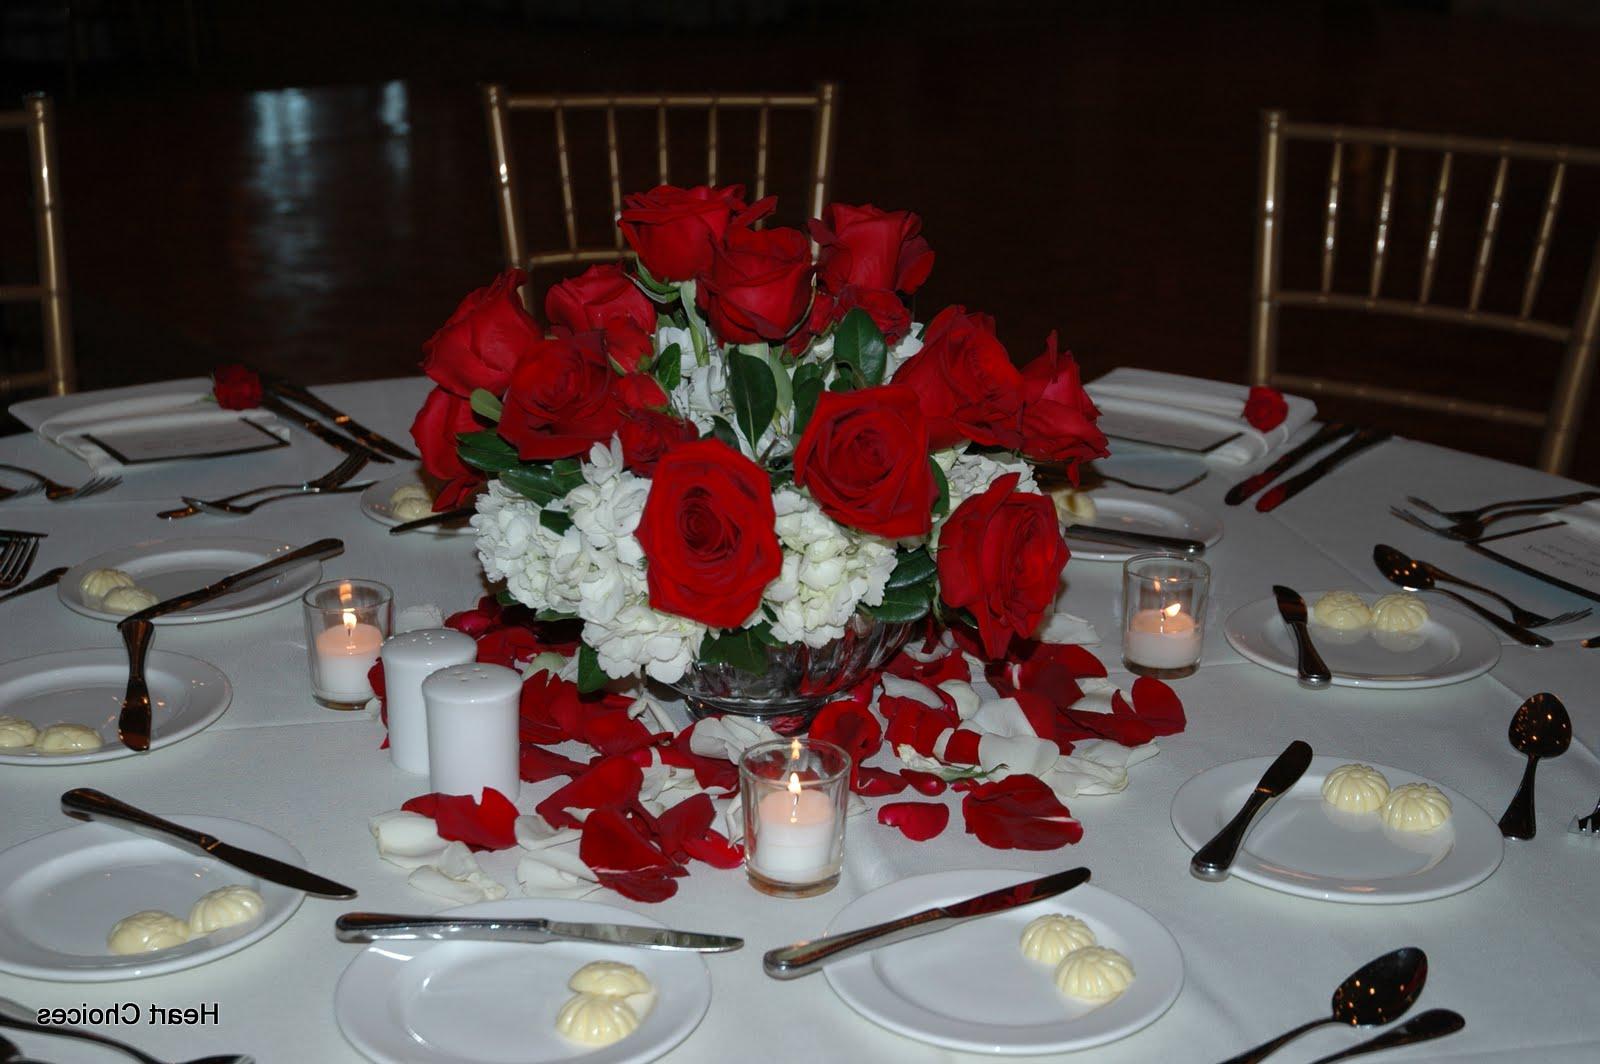 Red roses were the centerpiece